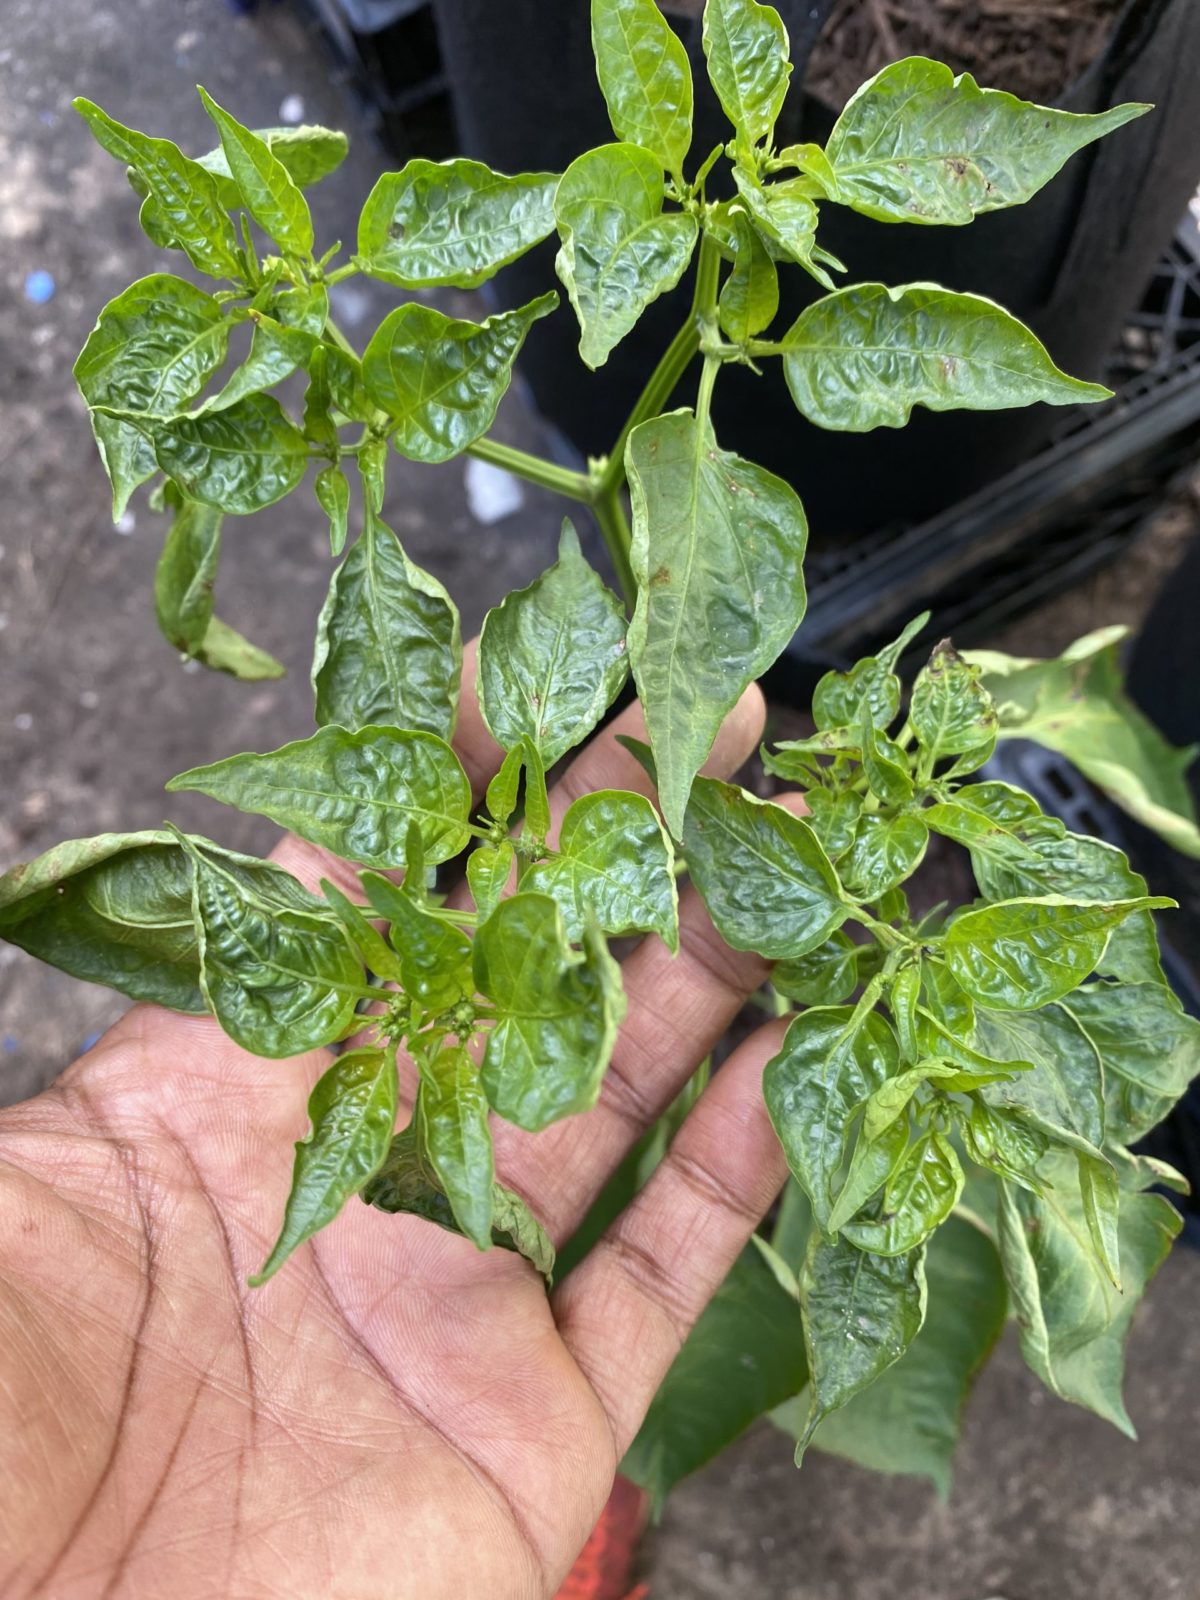 Upward Curling on Pepper Plants Leaves after Heavy Rains - Planters Place